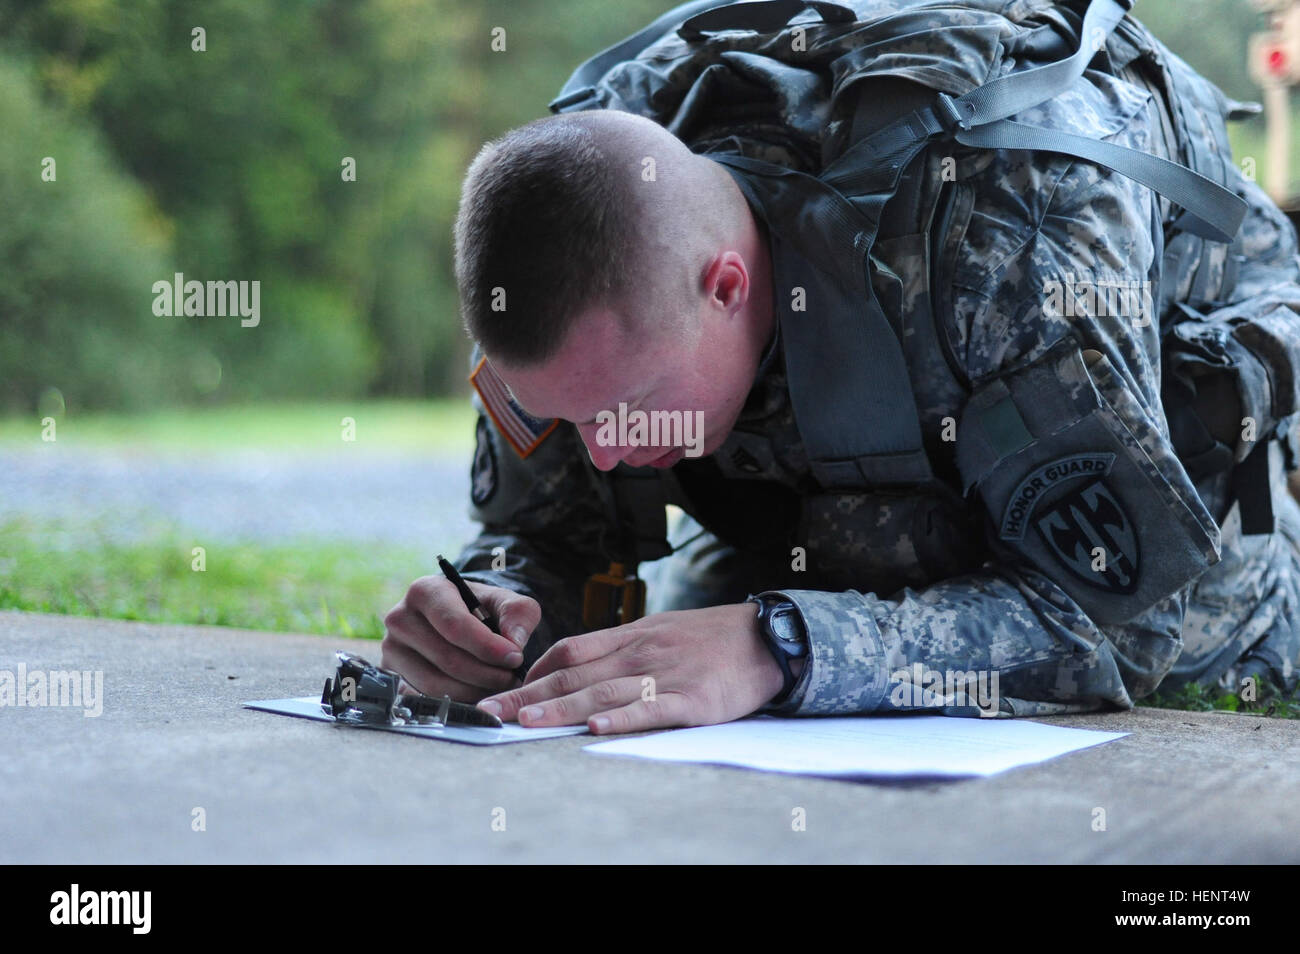 U.S. Army Staff Sgt. Jordan Stipp, assigned to 709th Military Police Battalion, 21st Theater Sustainment Command,  plots coordinates on a map during the land navigation portion of the  European Best Warrior Competition in Grafenwoehr, Germany, Sept. 14, 2014. The competition is a weeklong event that pushes Soldiers to the limits of their physical stamina, bearing, knowledge, adaptability and technical and tactical skills. The best warriors are ready and resilient Soldiers who live the Army values and lead from the front. (U.S. Army photo by Staff Sgt. Pablo N. Piedra/Released) European Best Wa Stock Photo